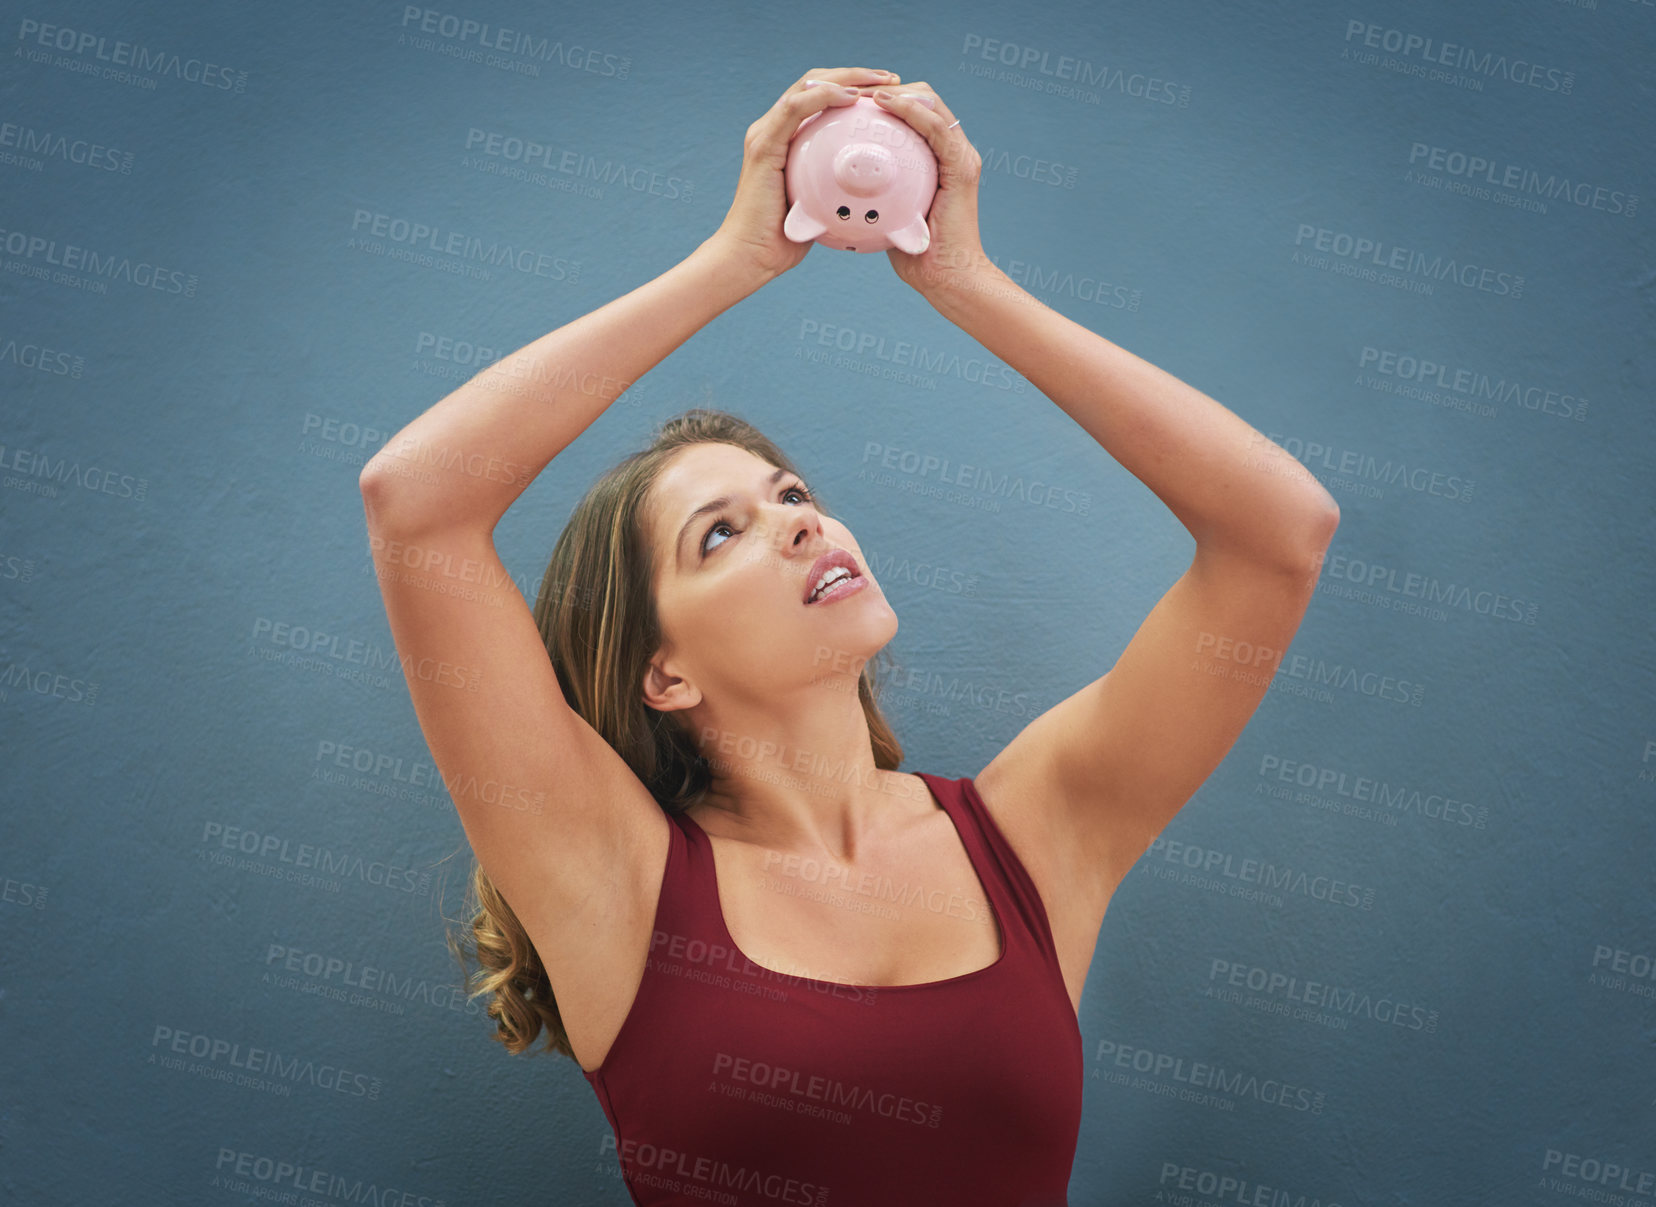 Buy stock photo Shot of a young woman holding a piggybank in the air against a gray background